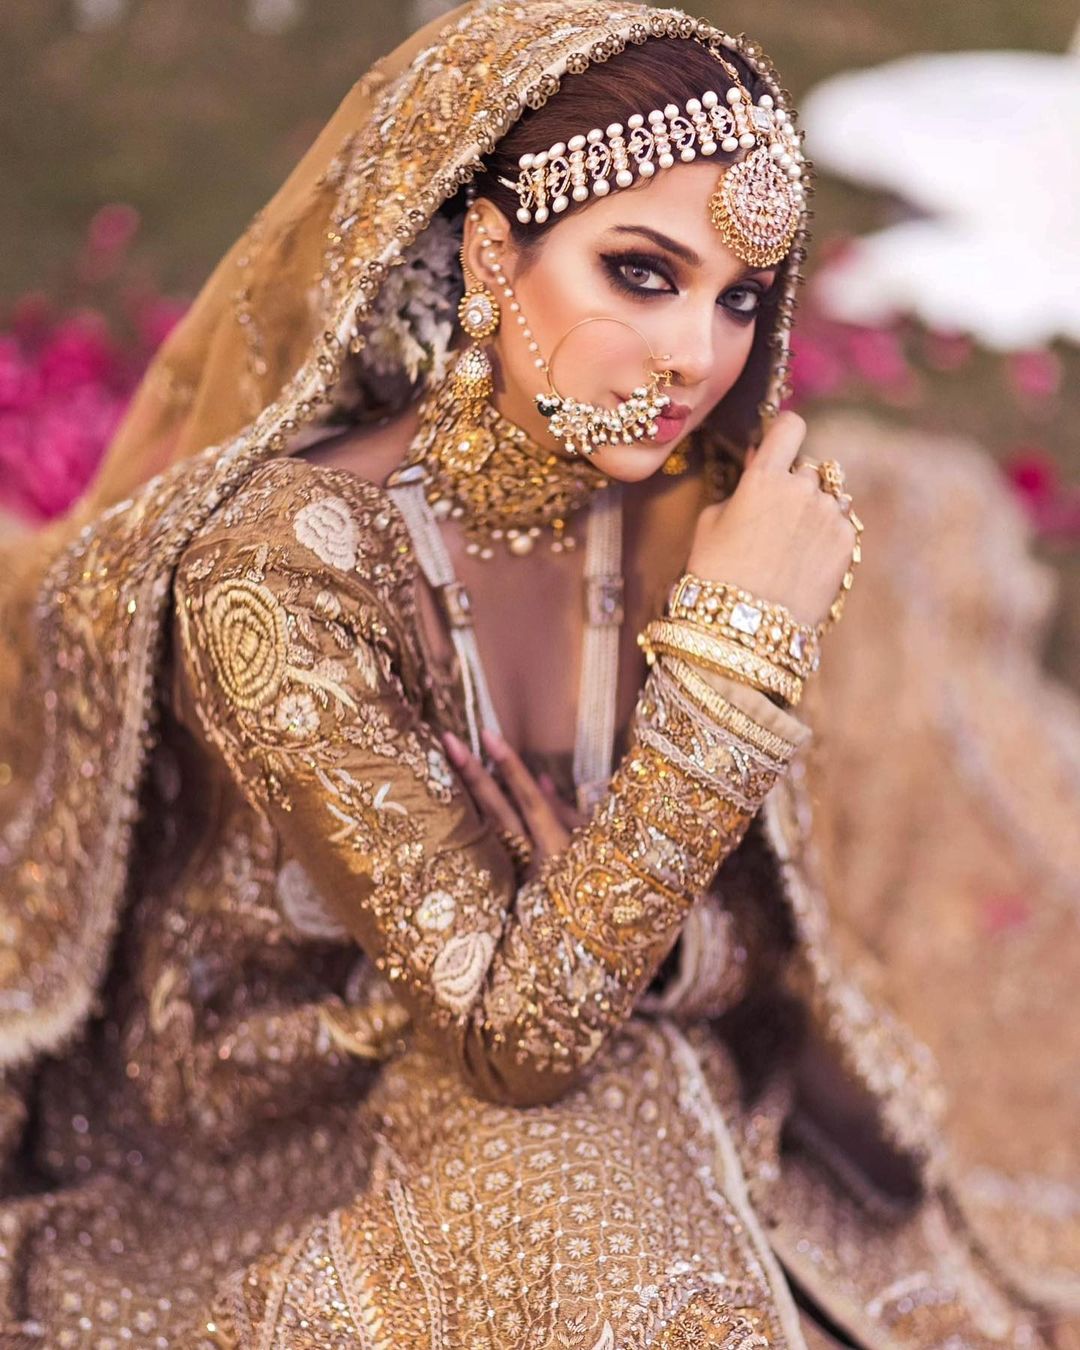 Sonya Hussyn Bukharee is a Mughal Queen in Recent Shoot